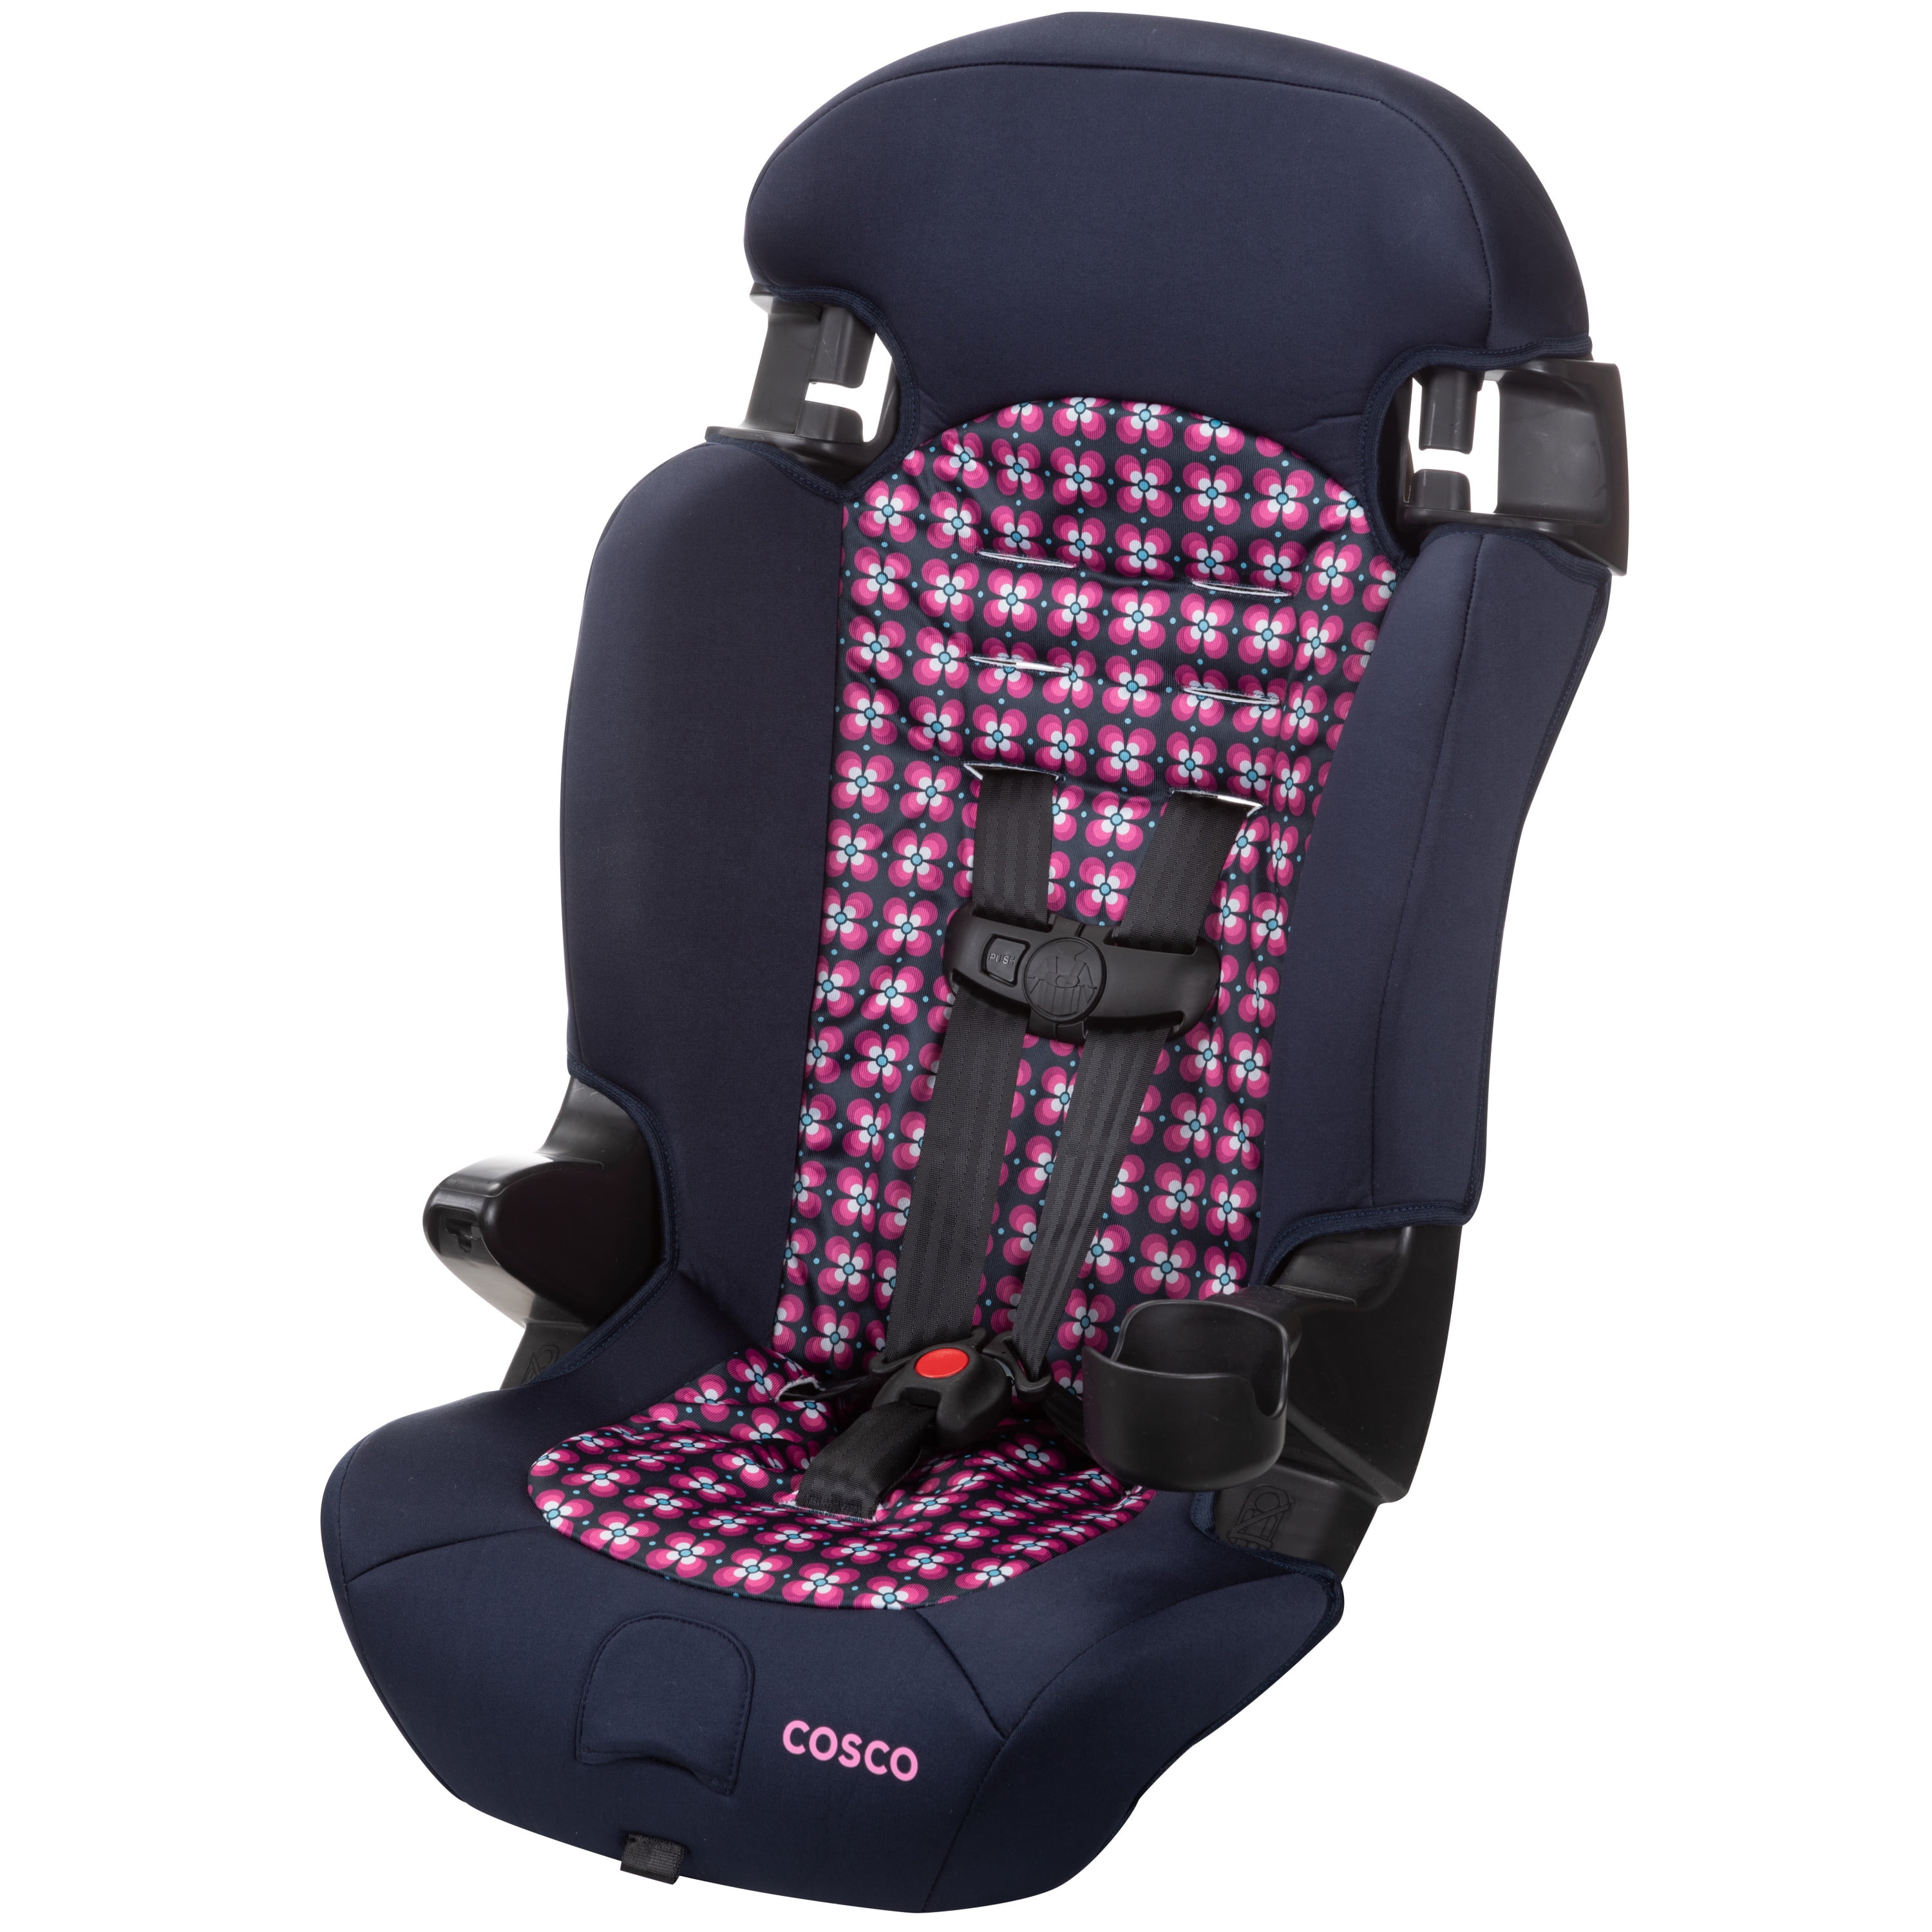 Cosco Finale 2-in-1 Booster Car Seat, Peony Tiles